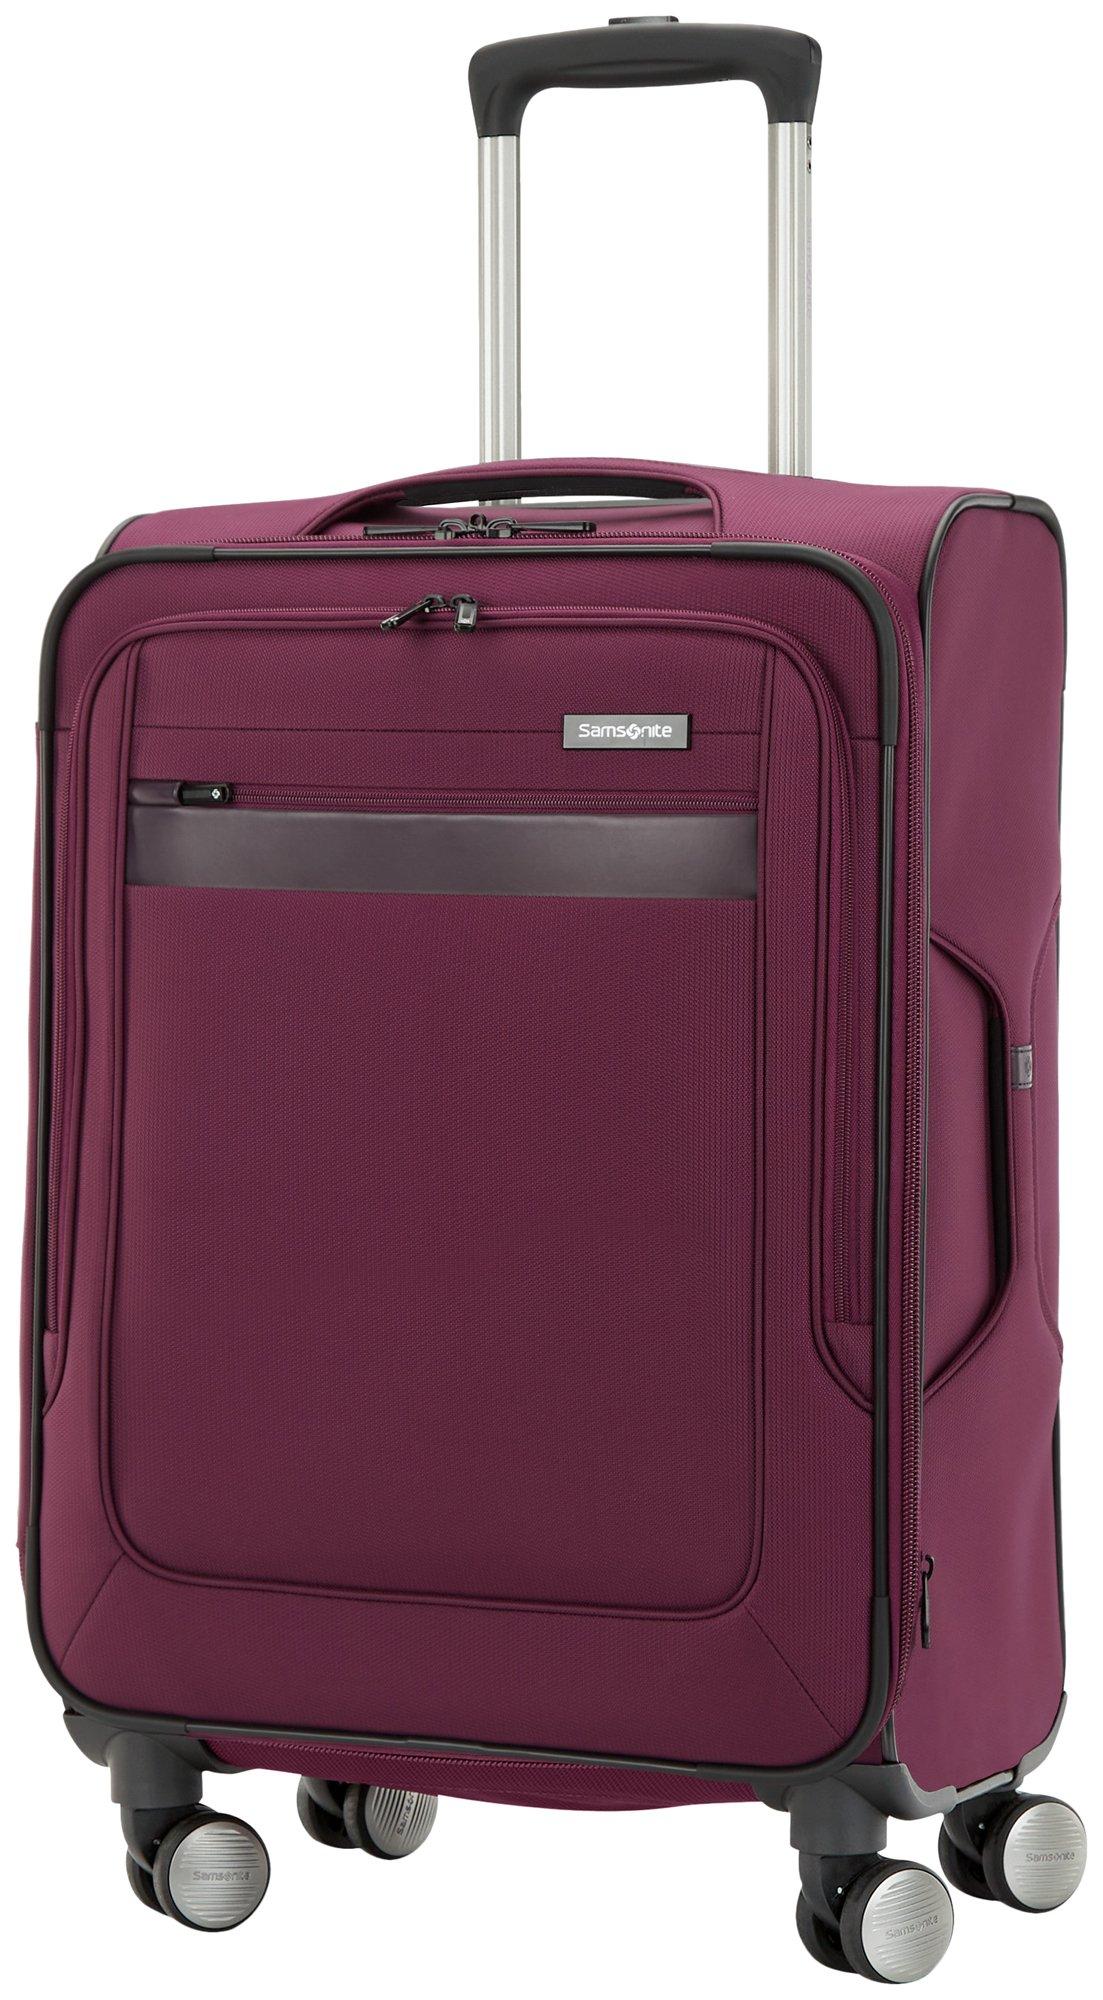 Ascella Expandable Carry-On Spinner Luggage